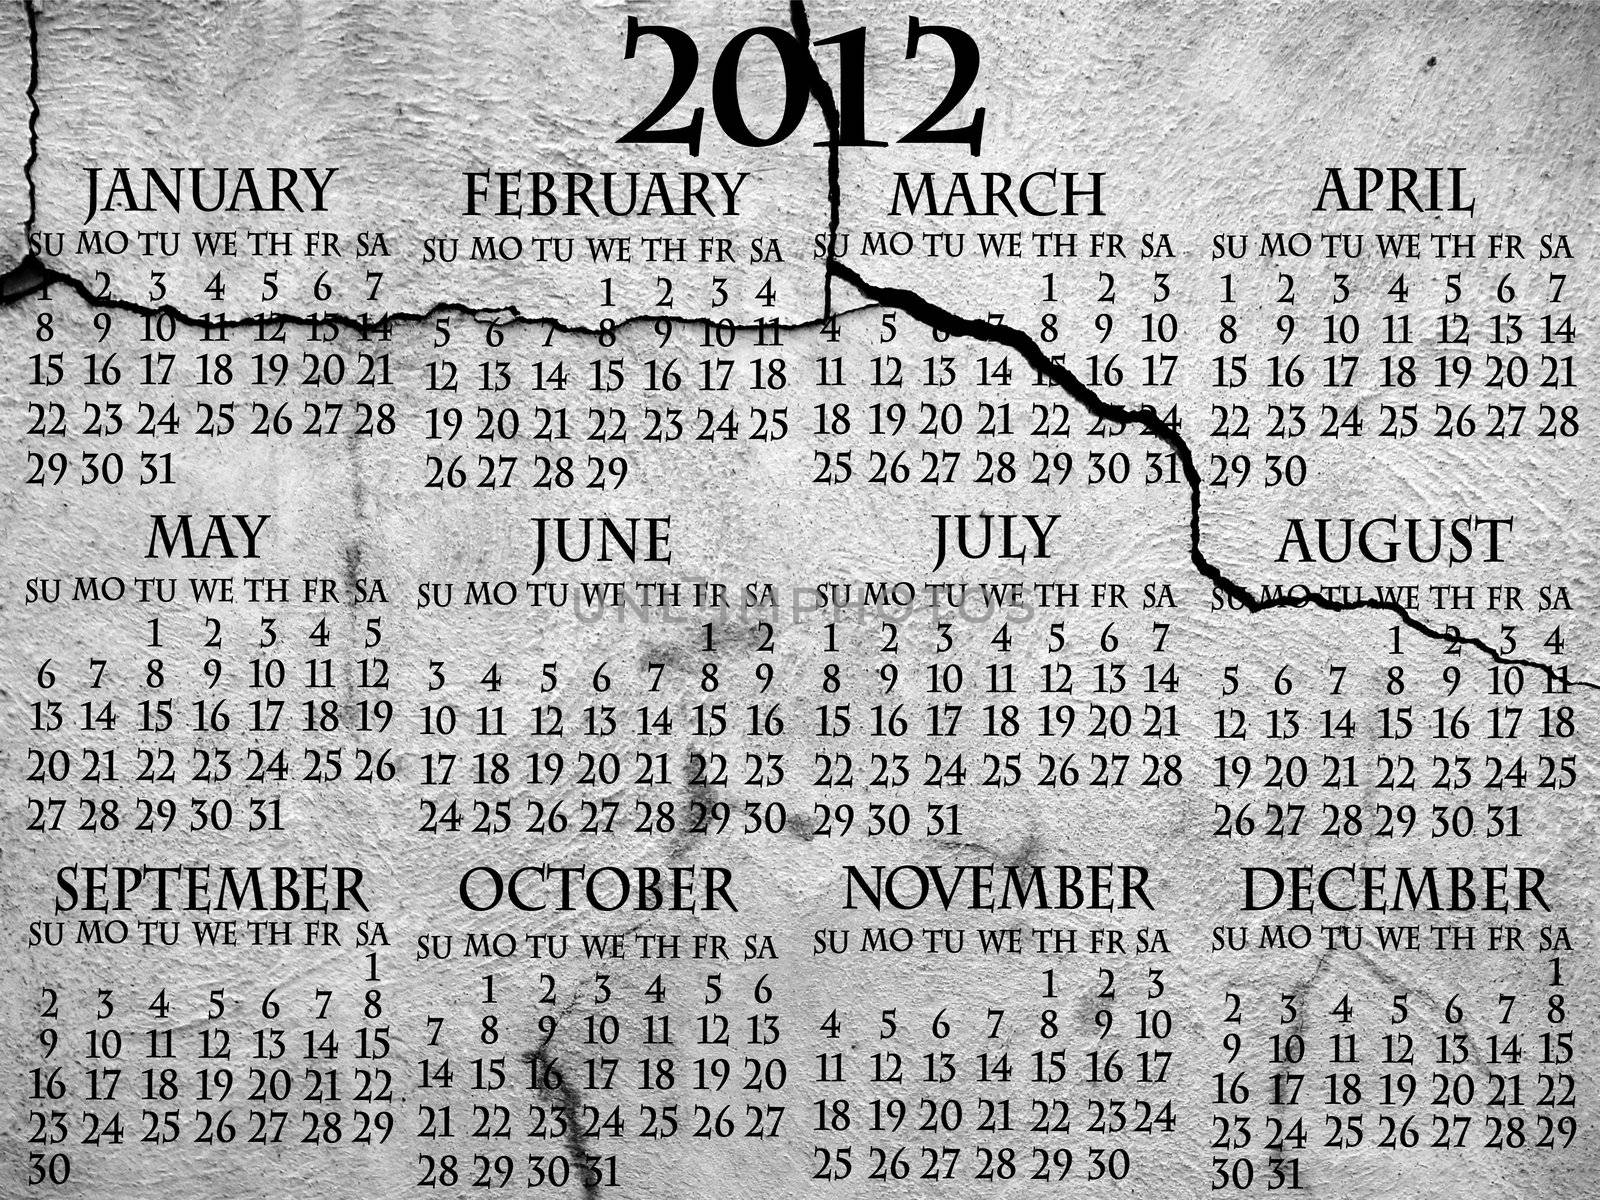 2012 cracked cement calendar by Mirage3